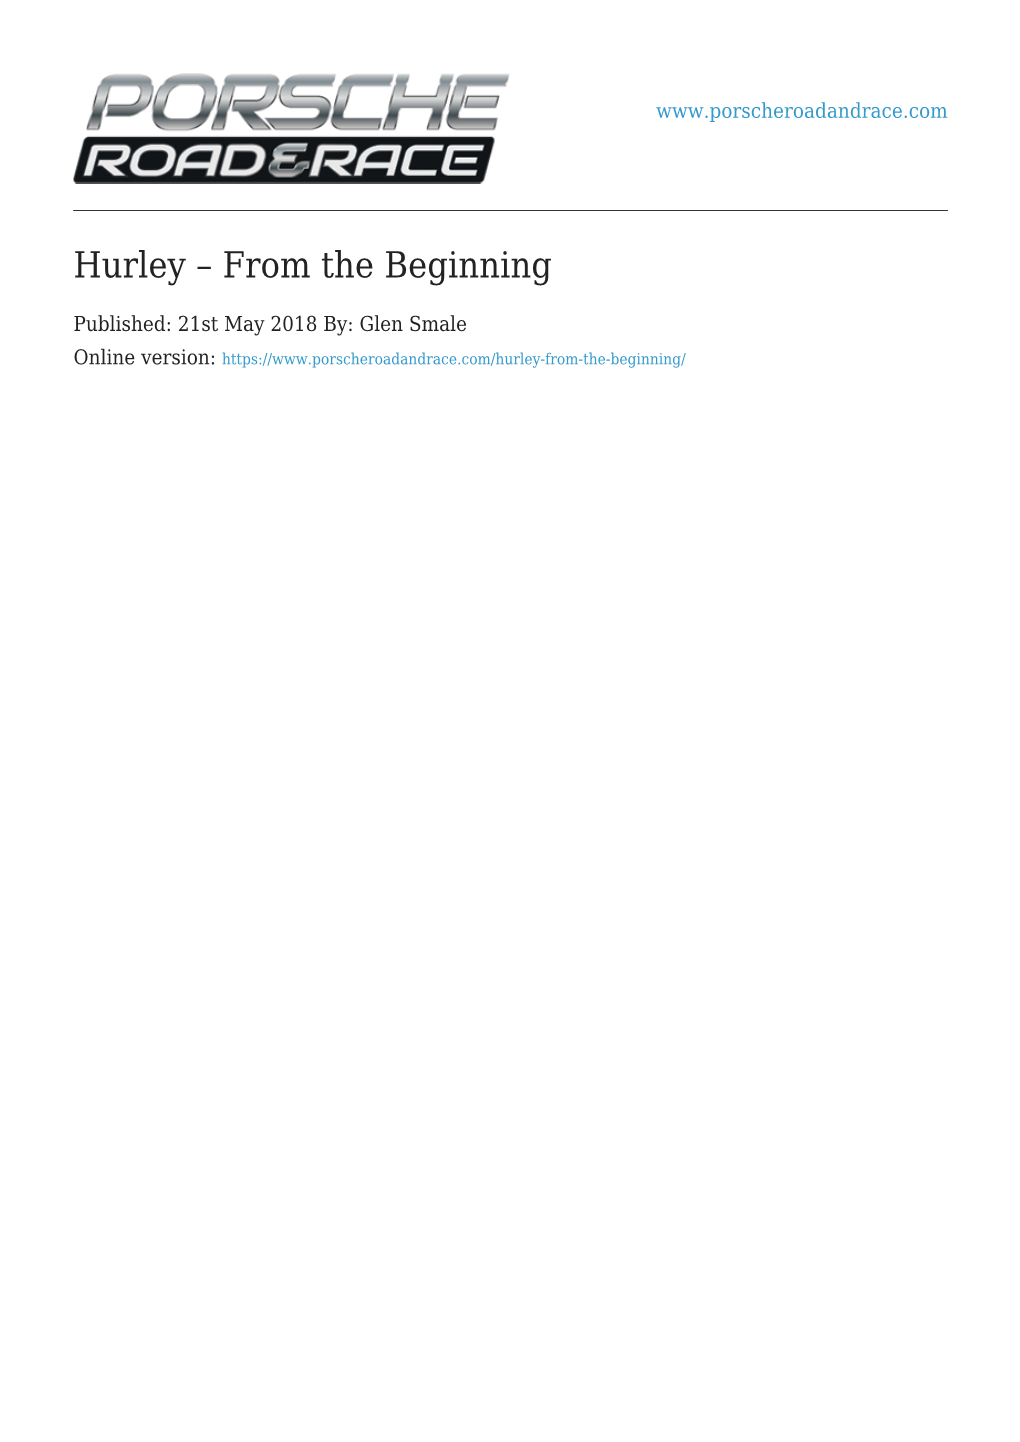 Hurley – from the Beginning